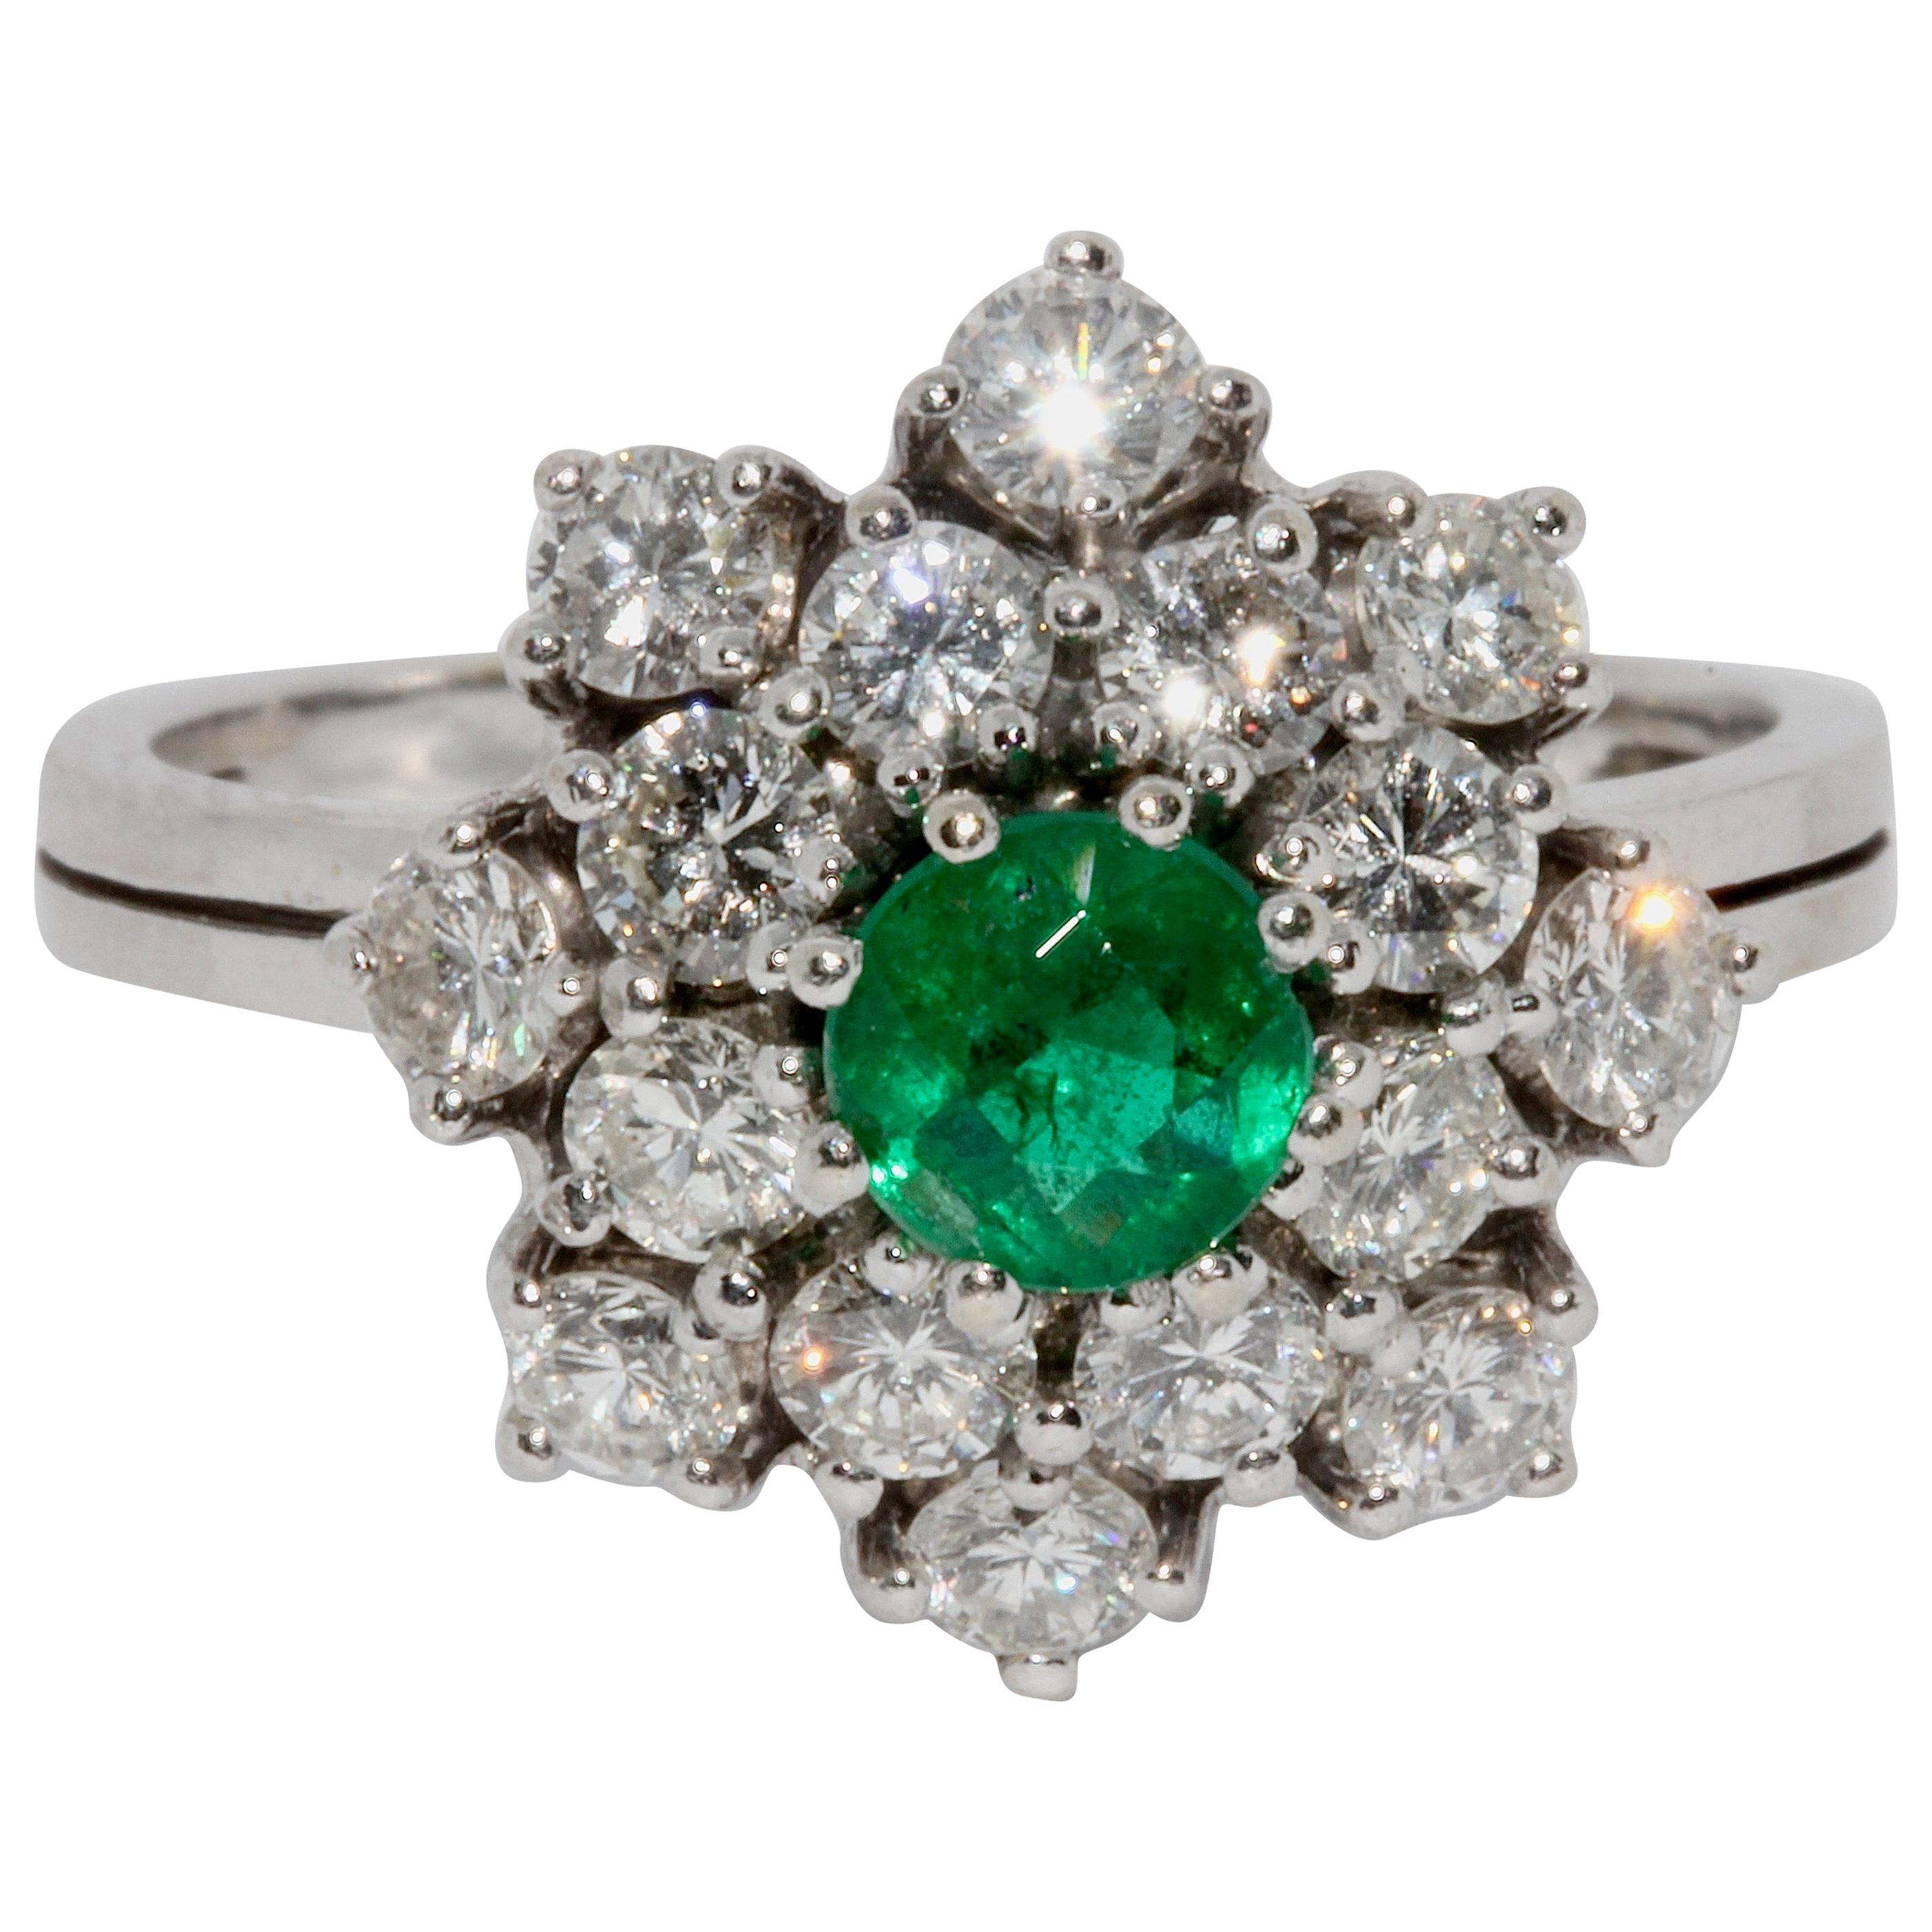 White Gold Ladies Cluster Ring with 16 Diamonds and Emerald